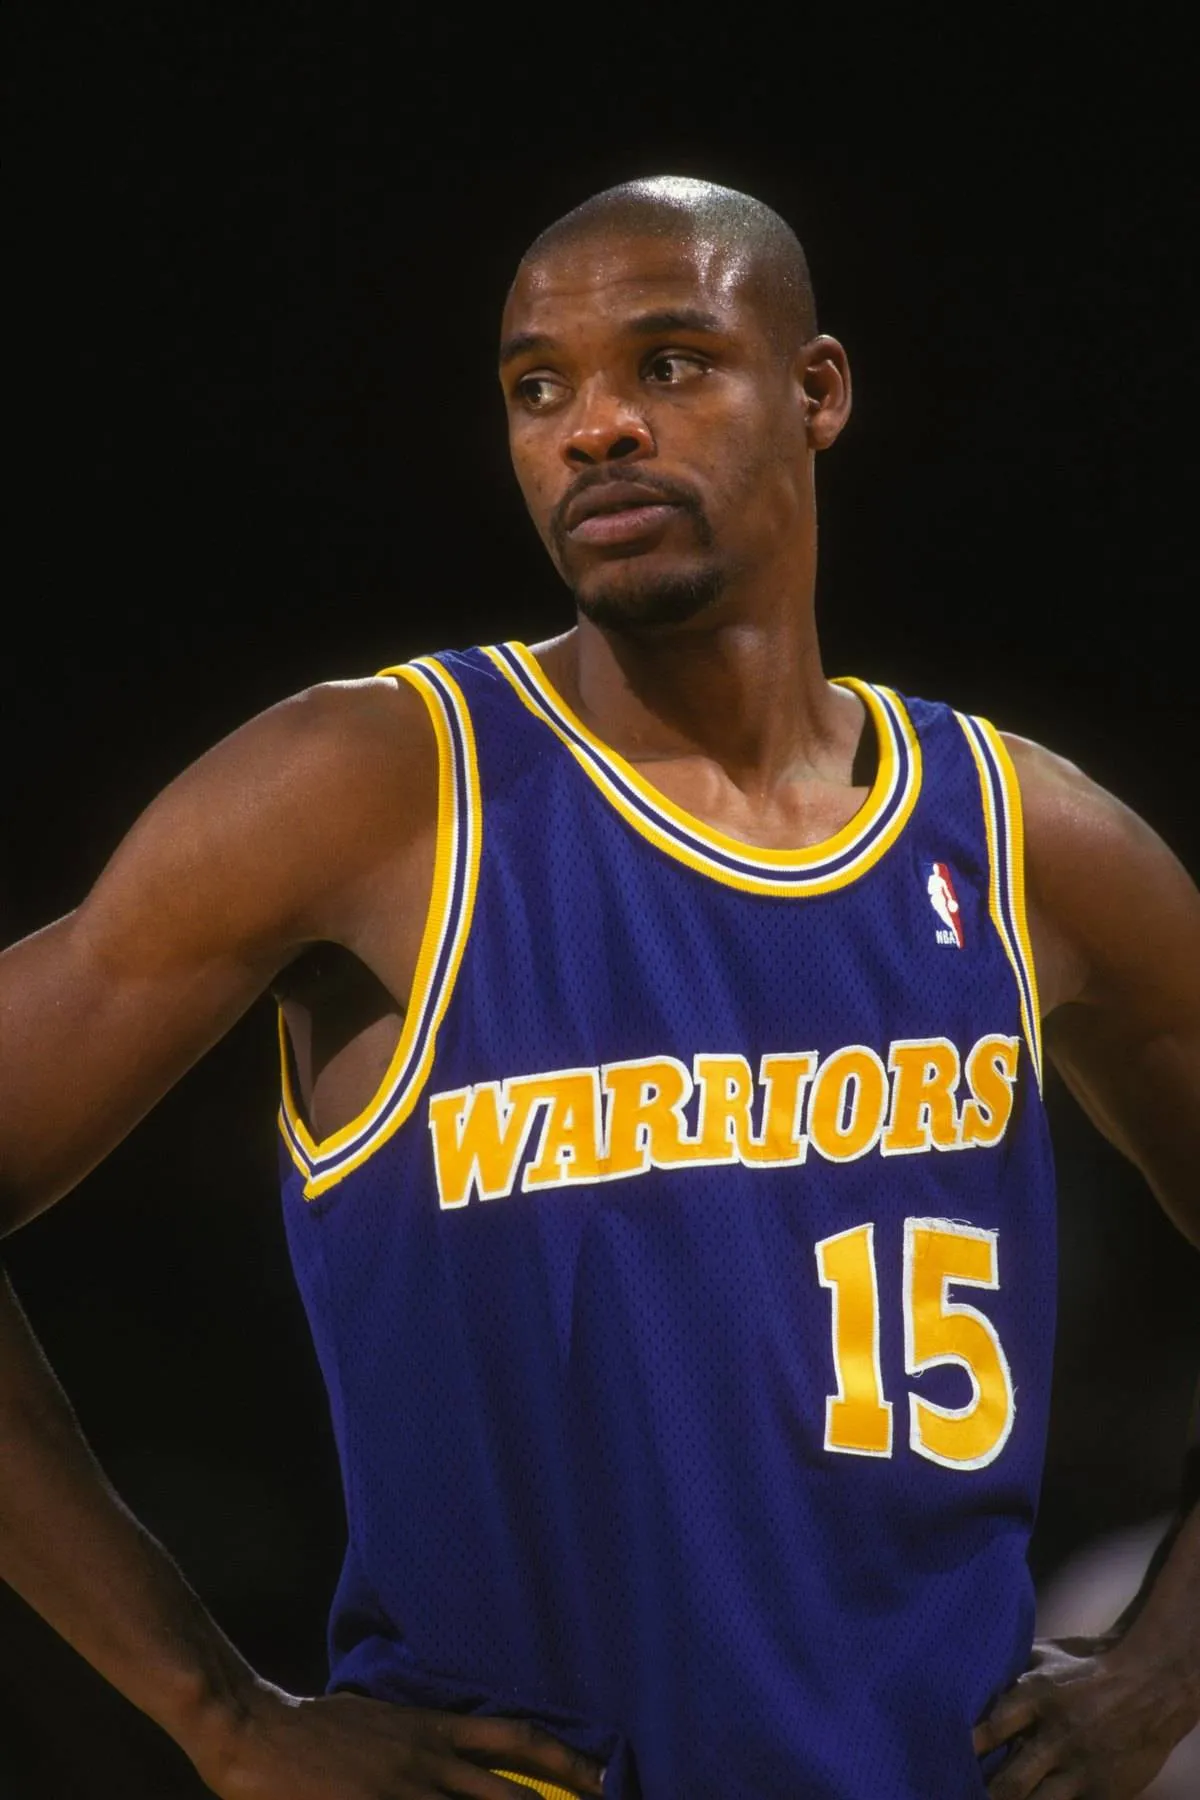 Latrell Sprewell #15of the Golden State Warriors during a NBA basketball game against the Washington Bullets on December 27, 1995 at USAir Arena in Landover, Maryland